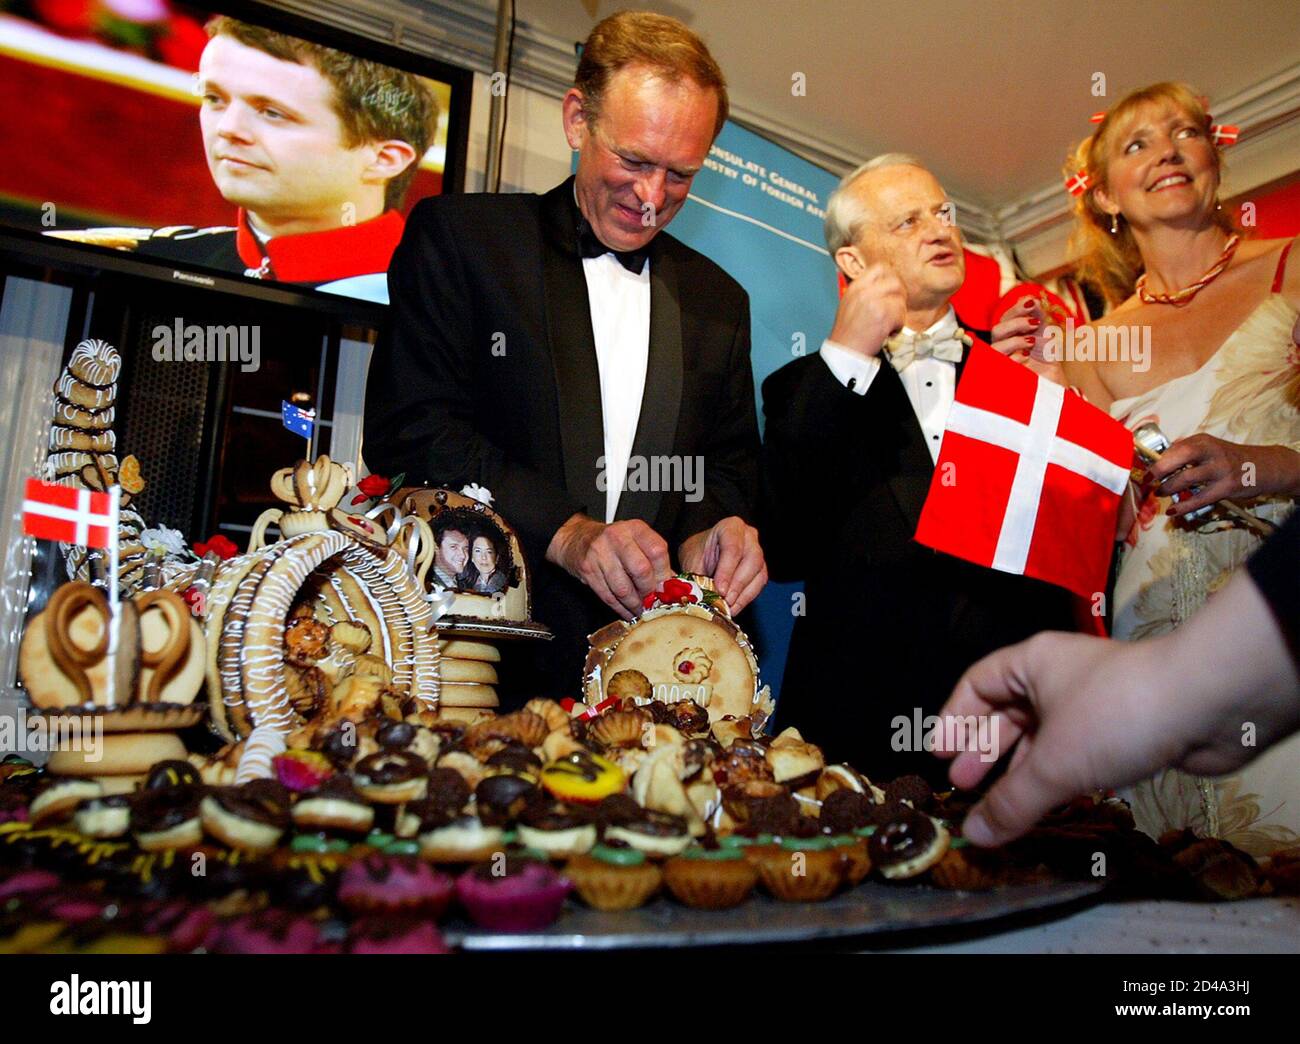 DANISH CROWN PRINCE FREDERIK SEEN ON A TELEVISION SCREEN AS PEOPLE EAT A WEDDING CAKE AT A PARTY FOR THE ROYAL WEDDING IN SYDNEY. Danish Crown Prince Frederik (L) is seen